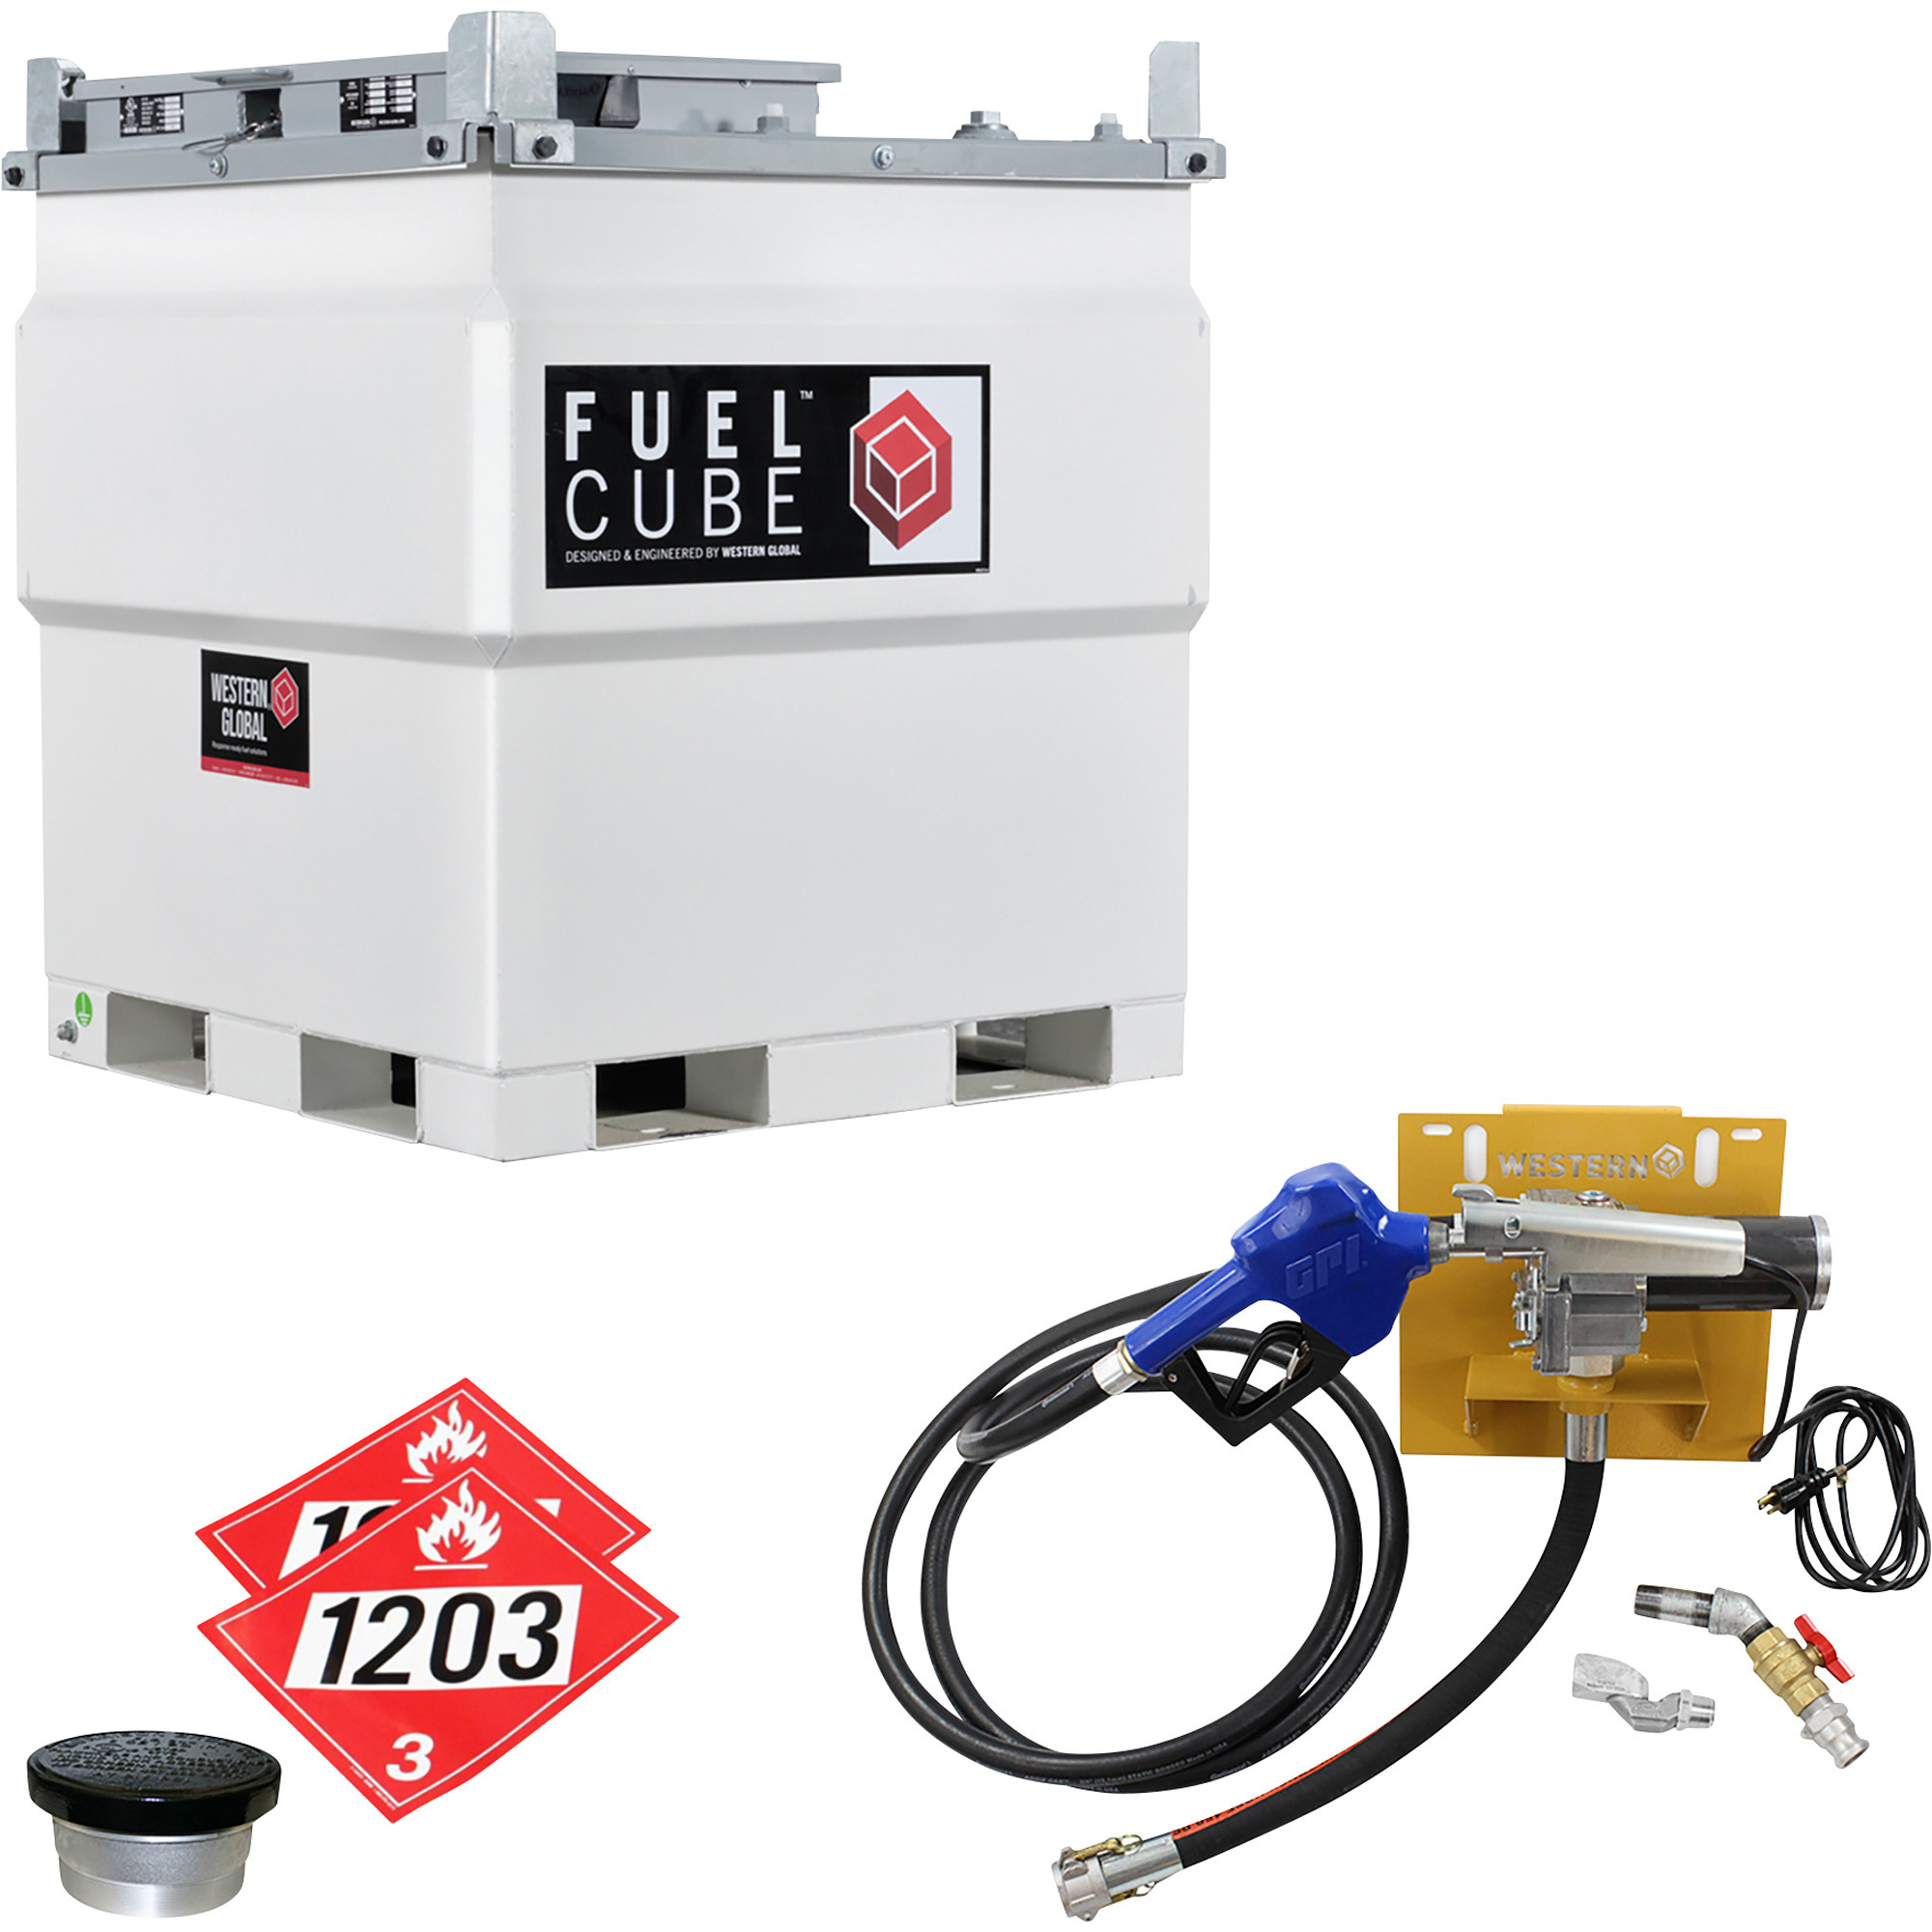 Western Global FuelCube Gasoline Fuel Tank Kit with Venting Kit, Pump and Fuel Level Gauge, Model FCPWN0250-11512GP-SNN-G